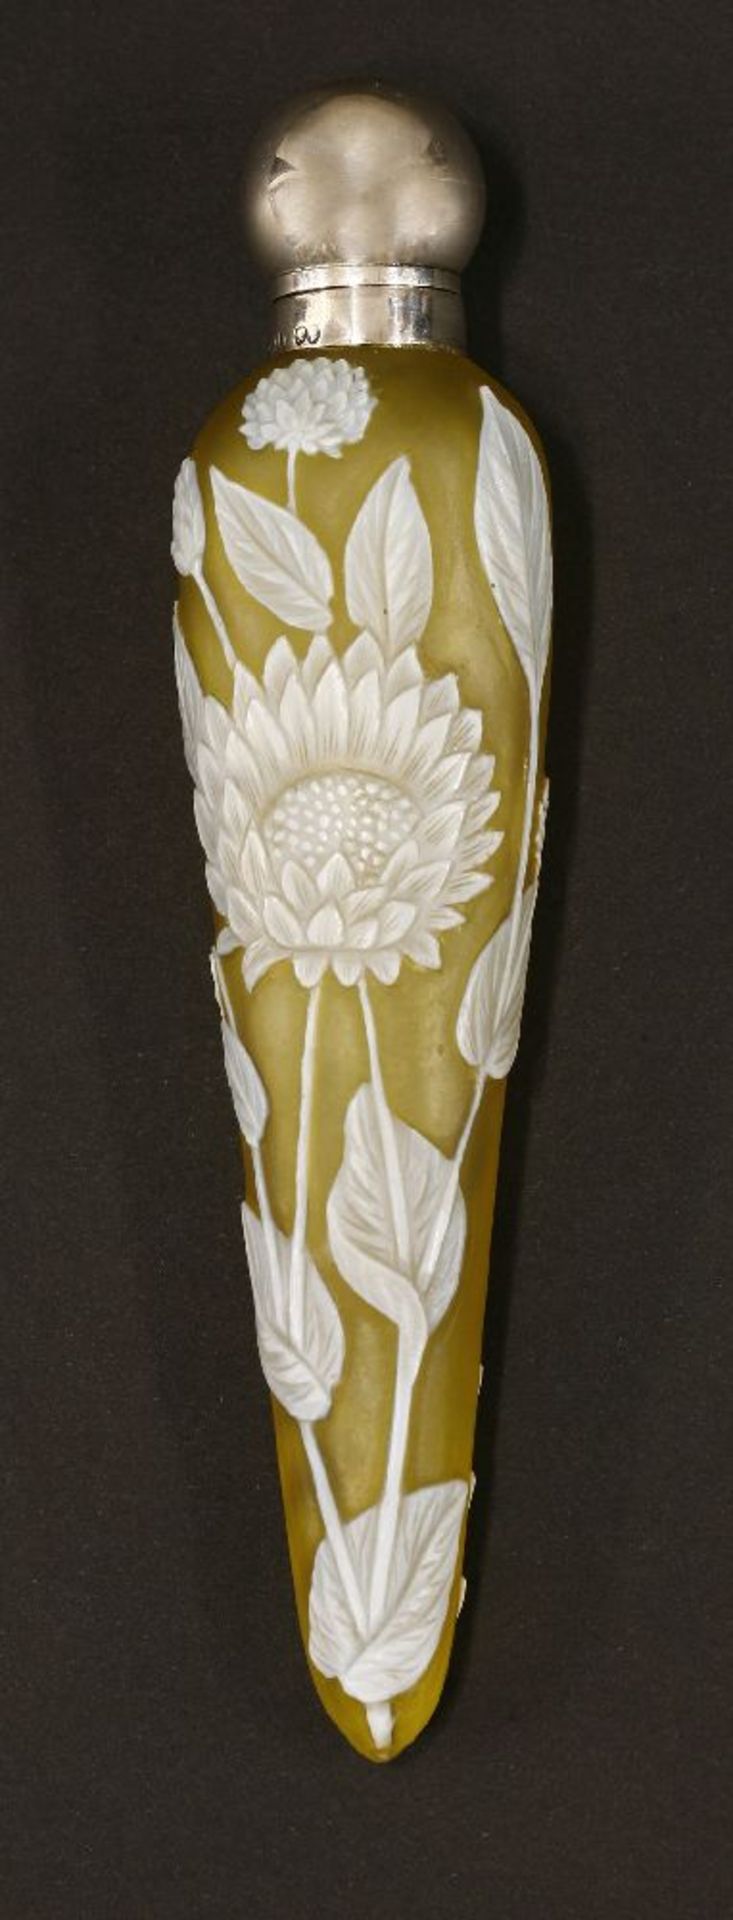 A cameo glass scent bottle,by Thomas Webb & Co, Stourbridge, the yellow glass body of elongated